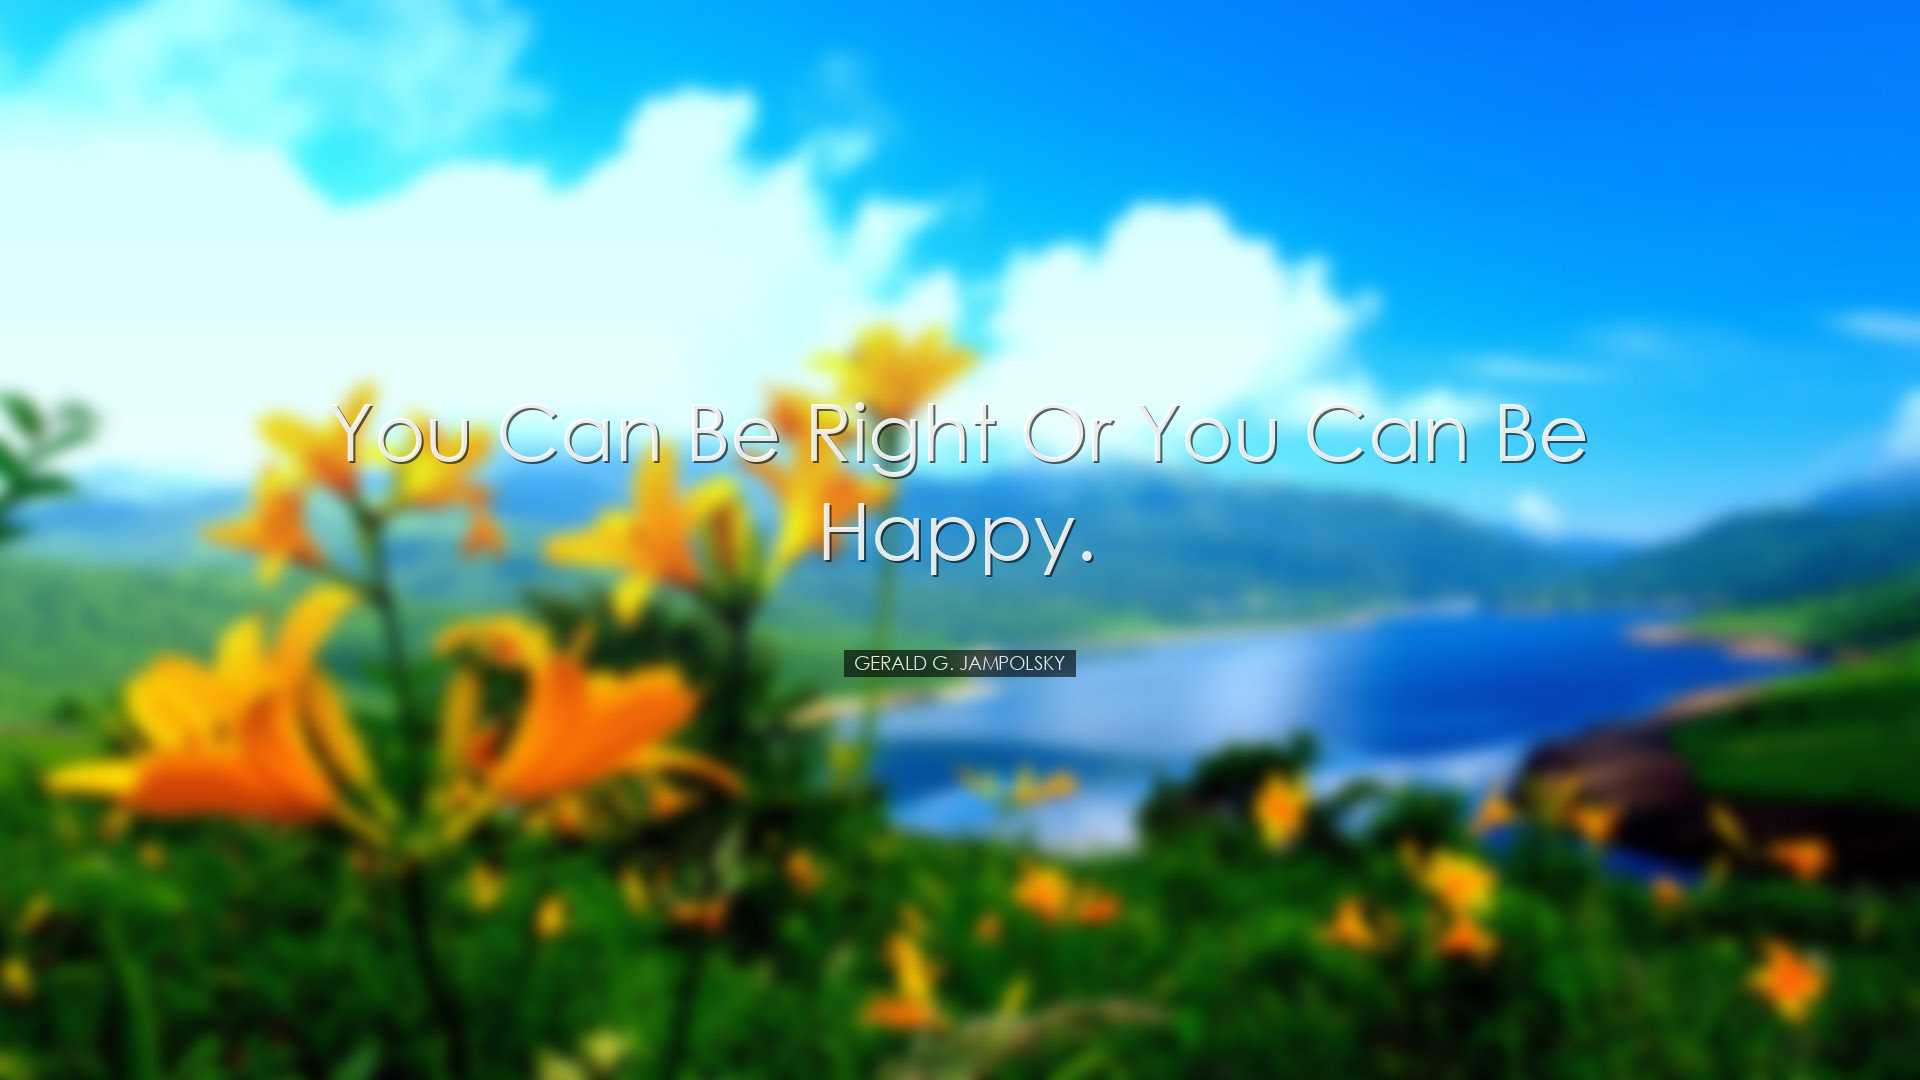 You can be right or you can be happy. - Gerald G. Jampolsky